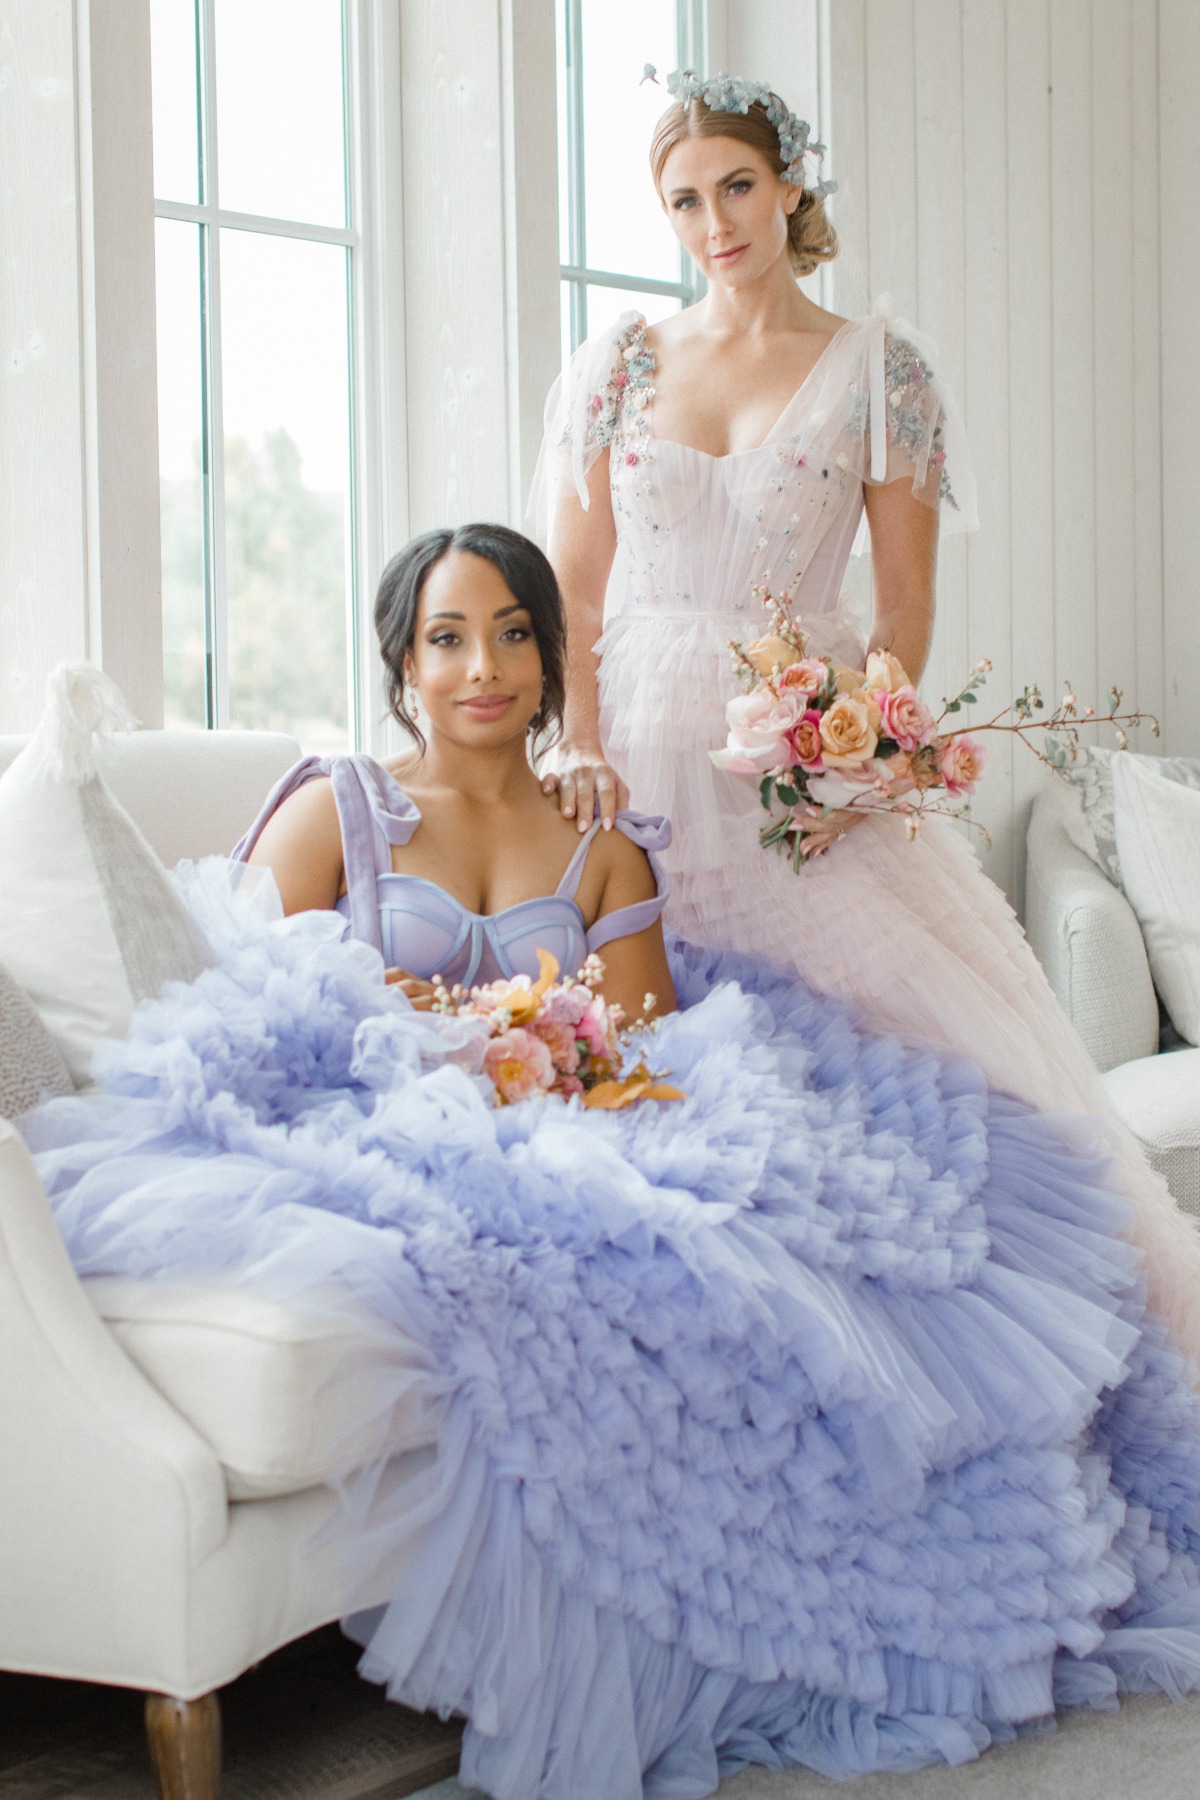 A Fun Fashion-Filled Inspiration Shoot For Every Bride's Style